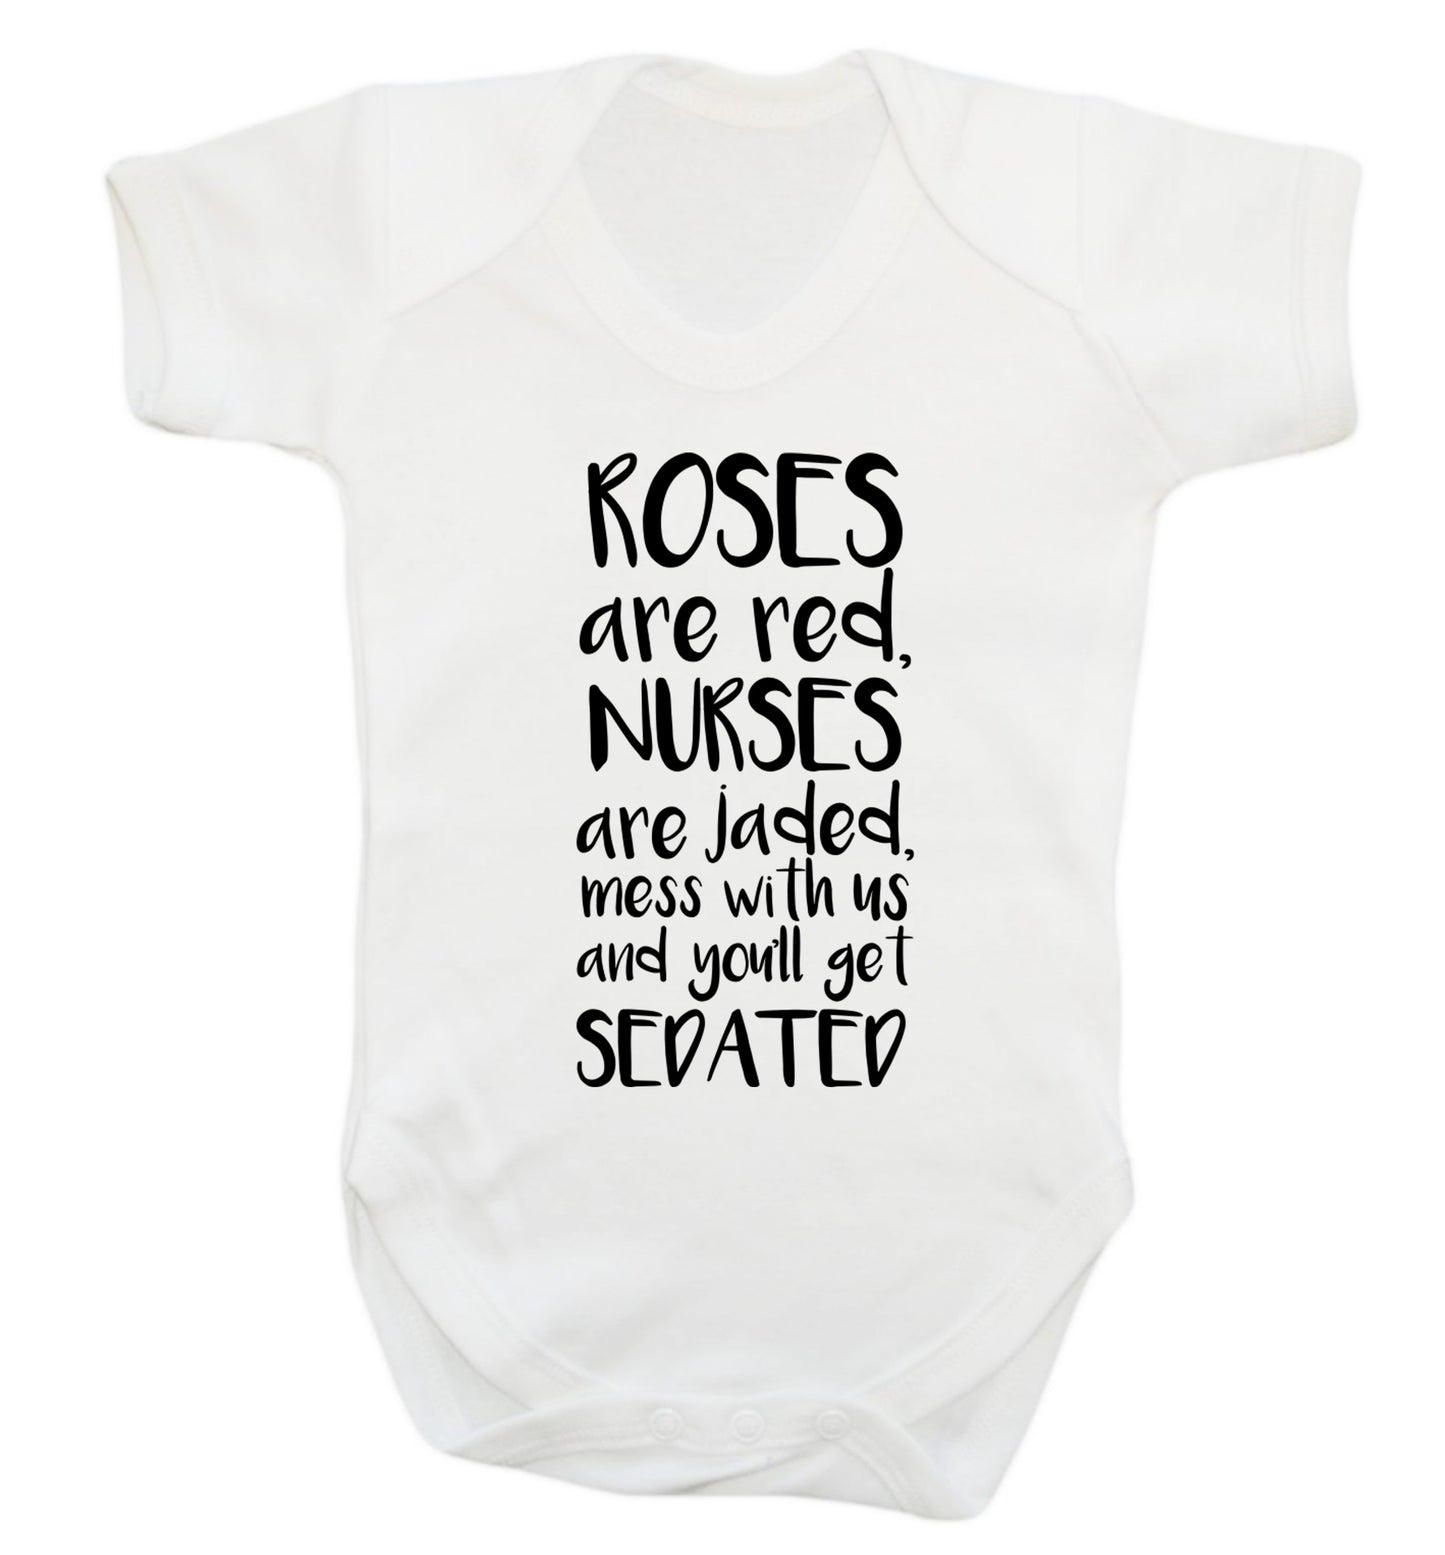 Roses are red, nurses are jaded, mess with us and you'll get sedated Baby Vest white 18-24 months